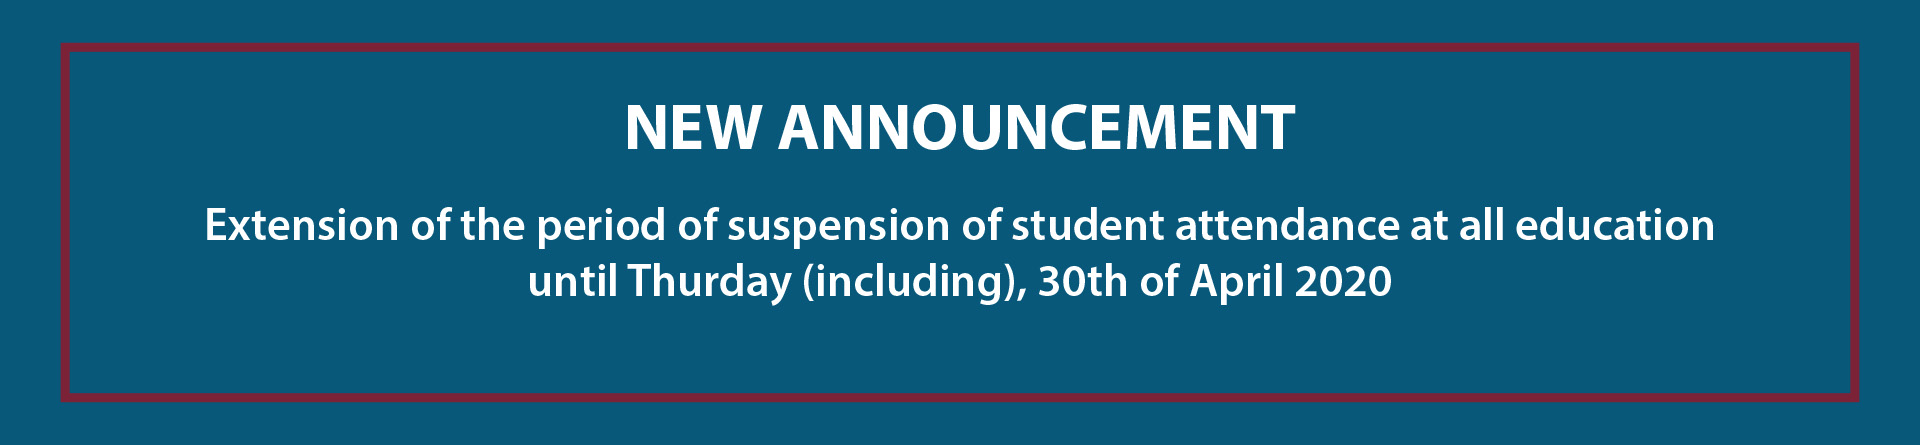 New extension of the period of suspension of student attendance until April 30th, 2020